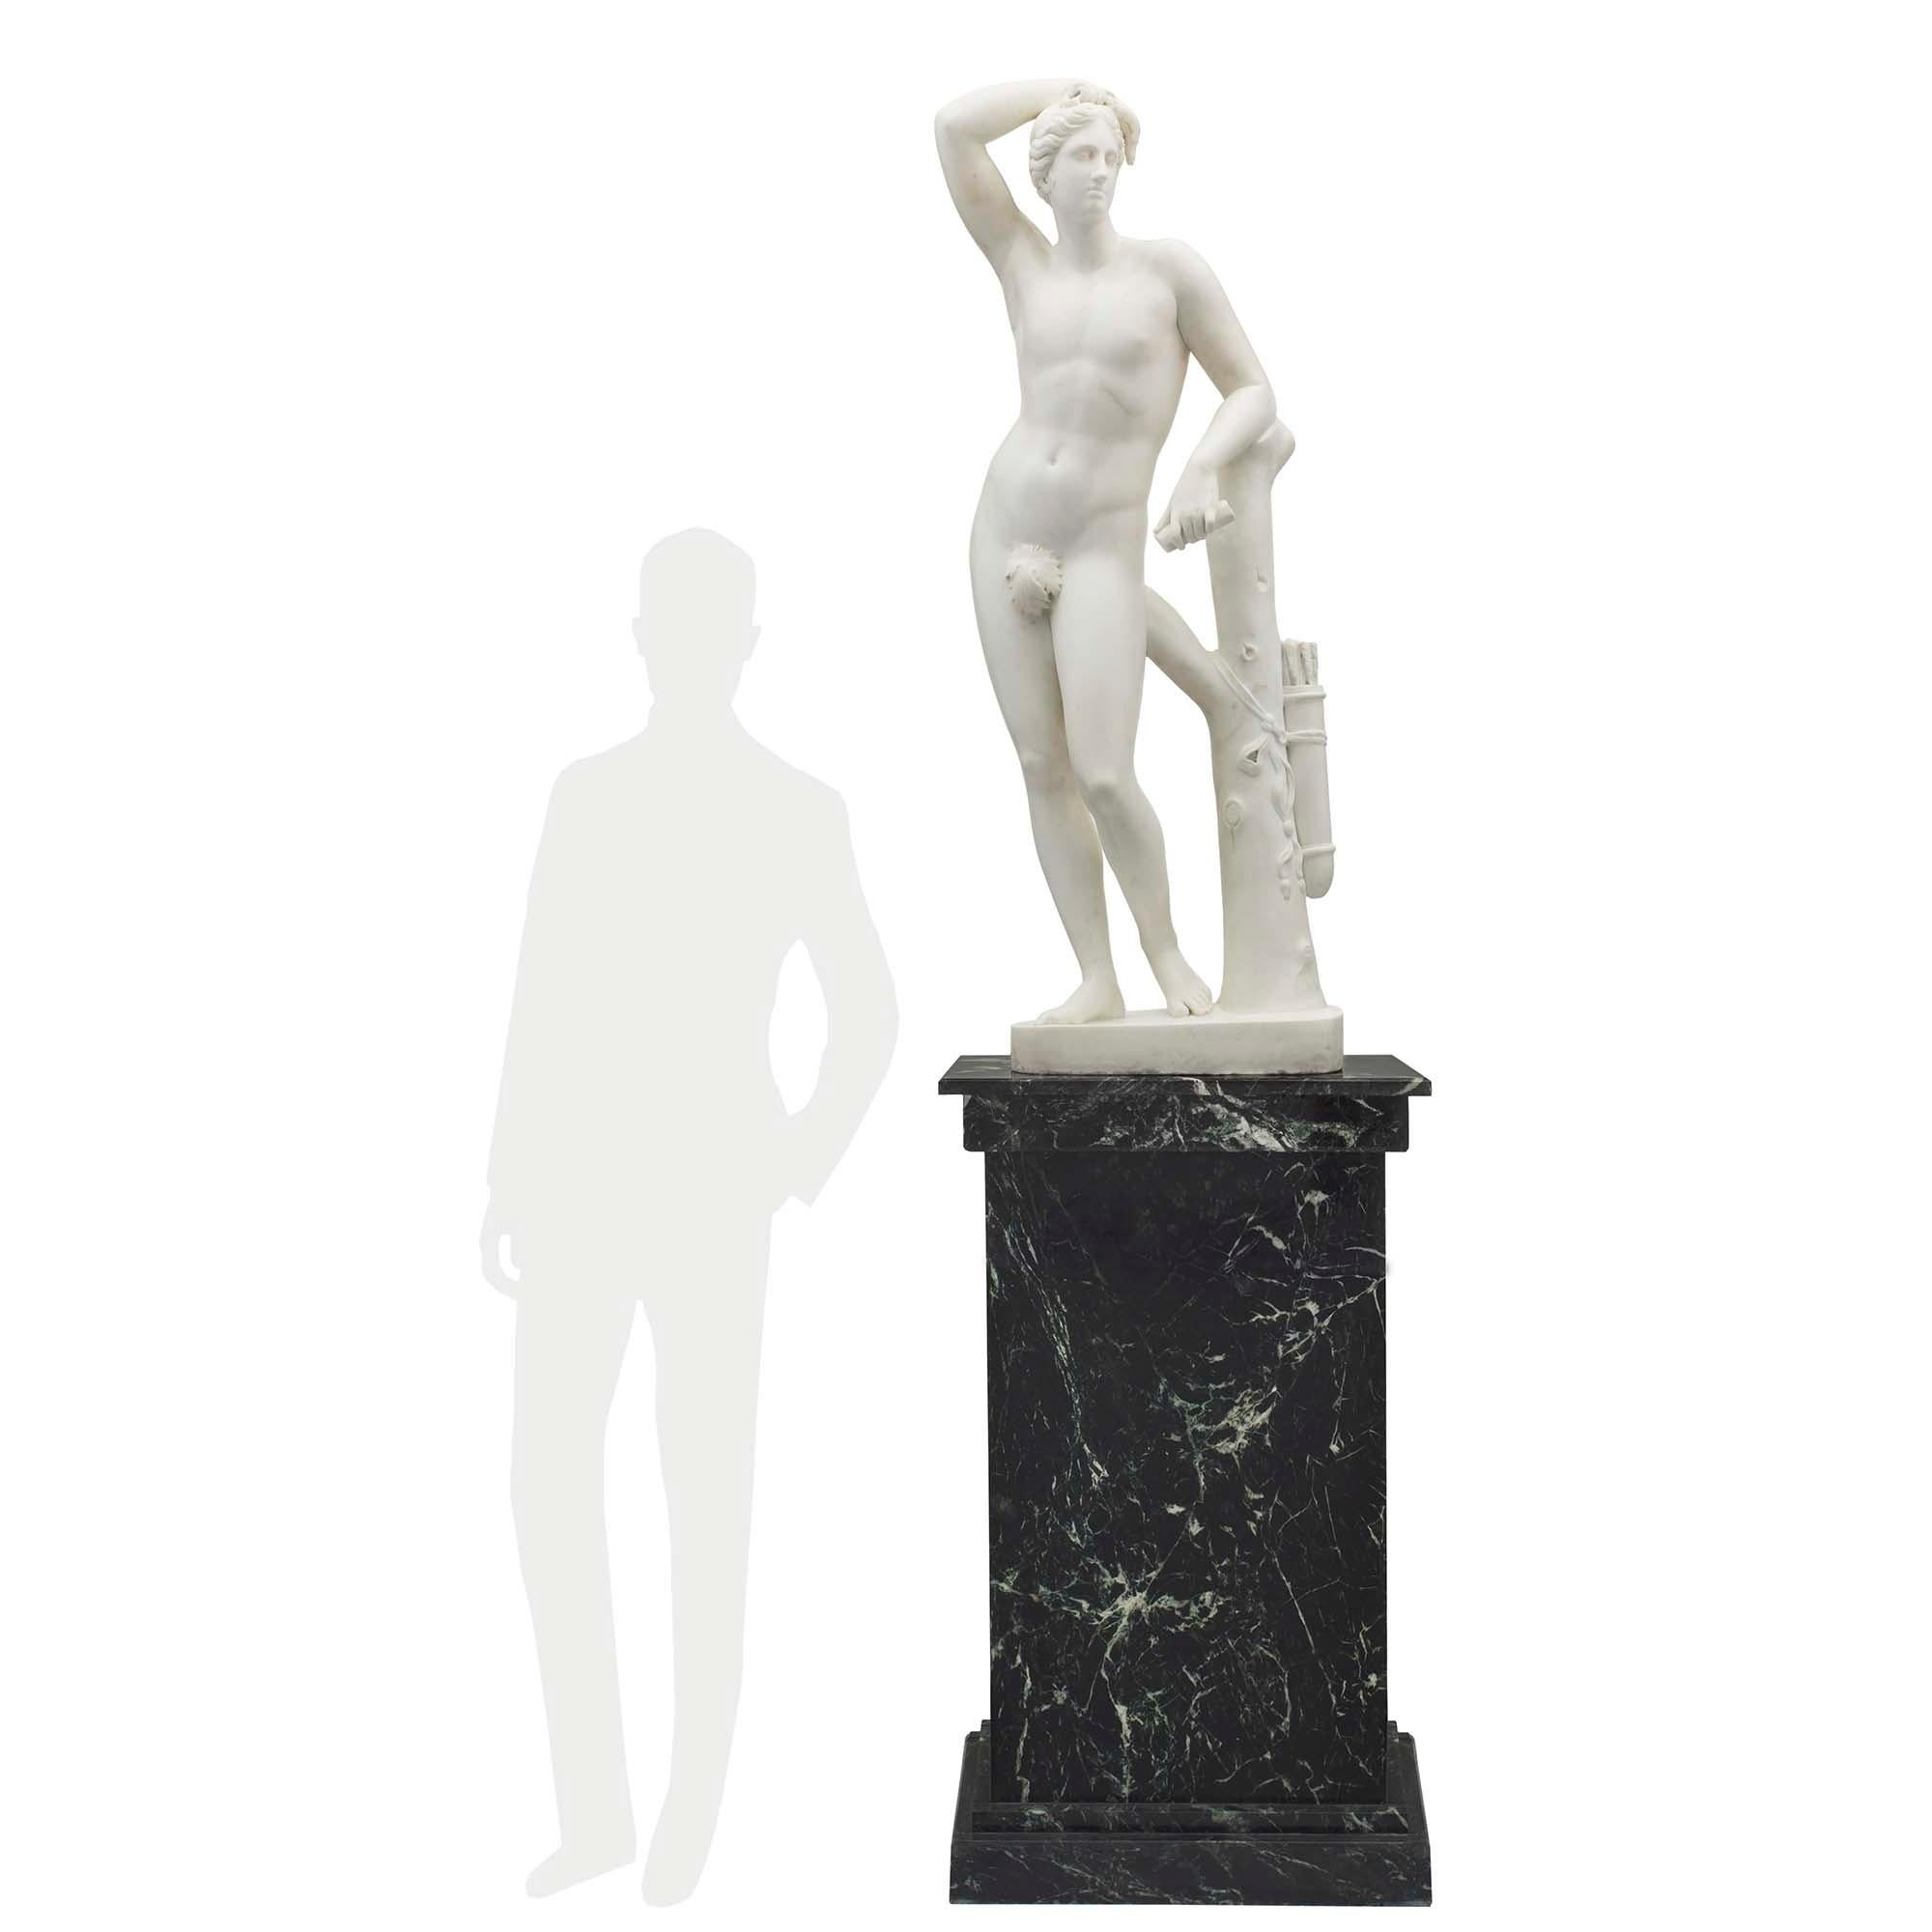 A striking Italian mid-19th century neoclassical white Carrara marble statue of Apollo signed V Livi Ejegui Carrara, 1845. The Statue is raised by an oval base with a tree truck where his quiver is hanging, tied by a finely sculpted bow. The